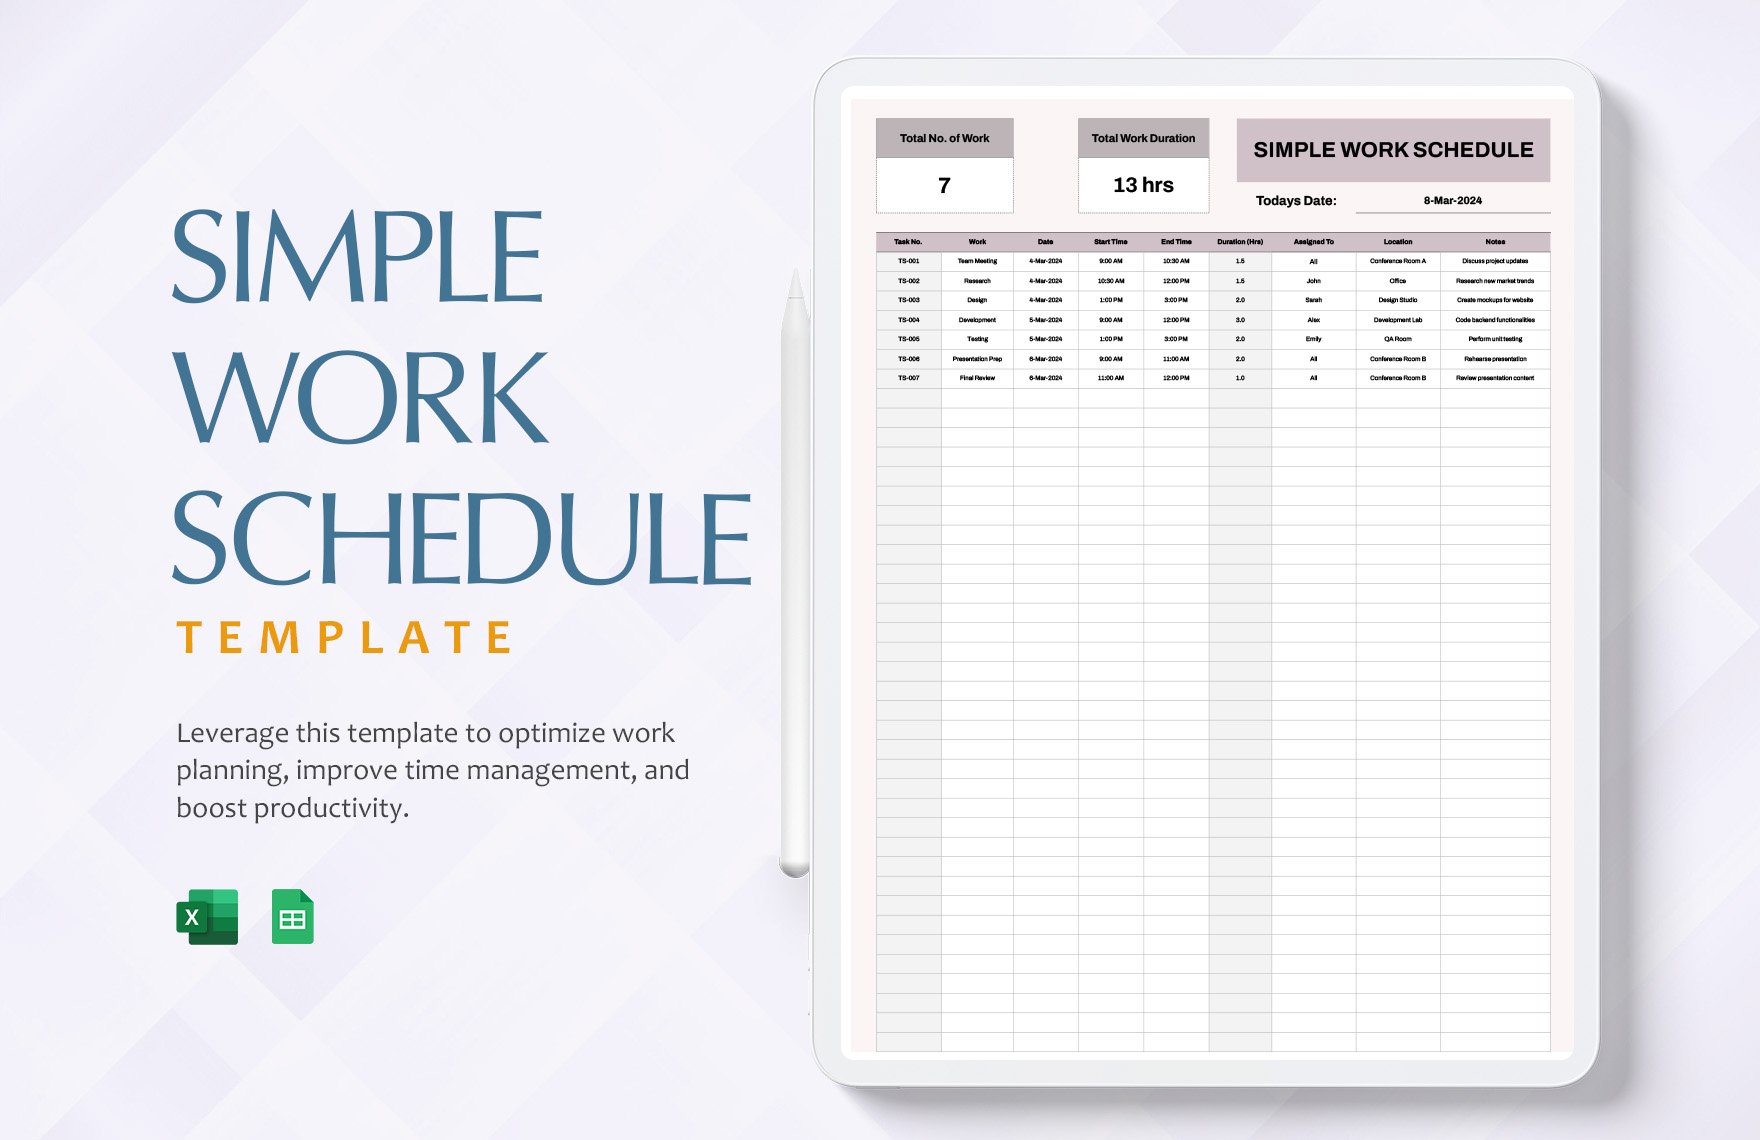 Simple Work Schedule Template in Excel, Google Sheets